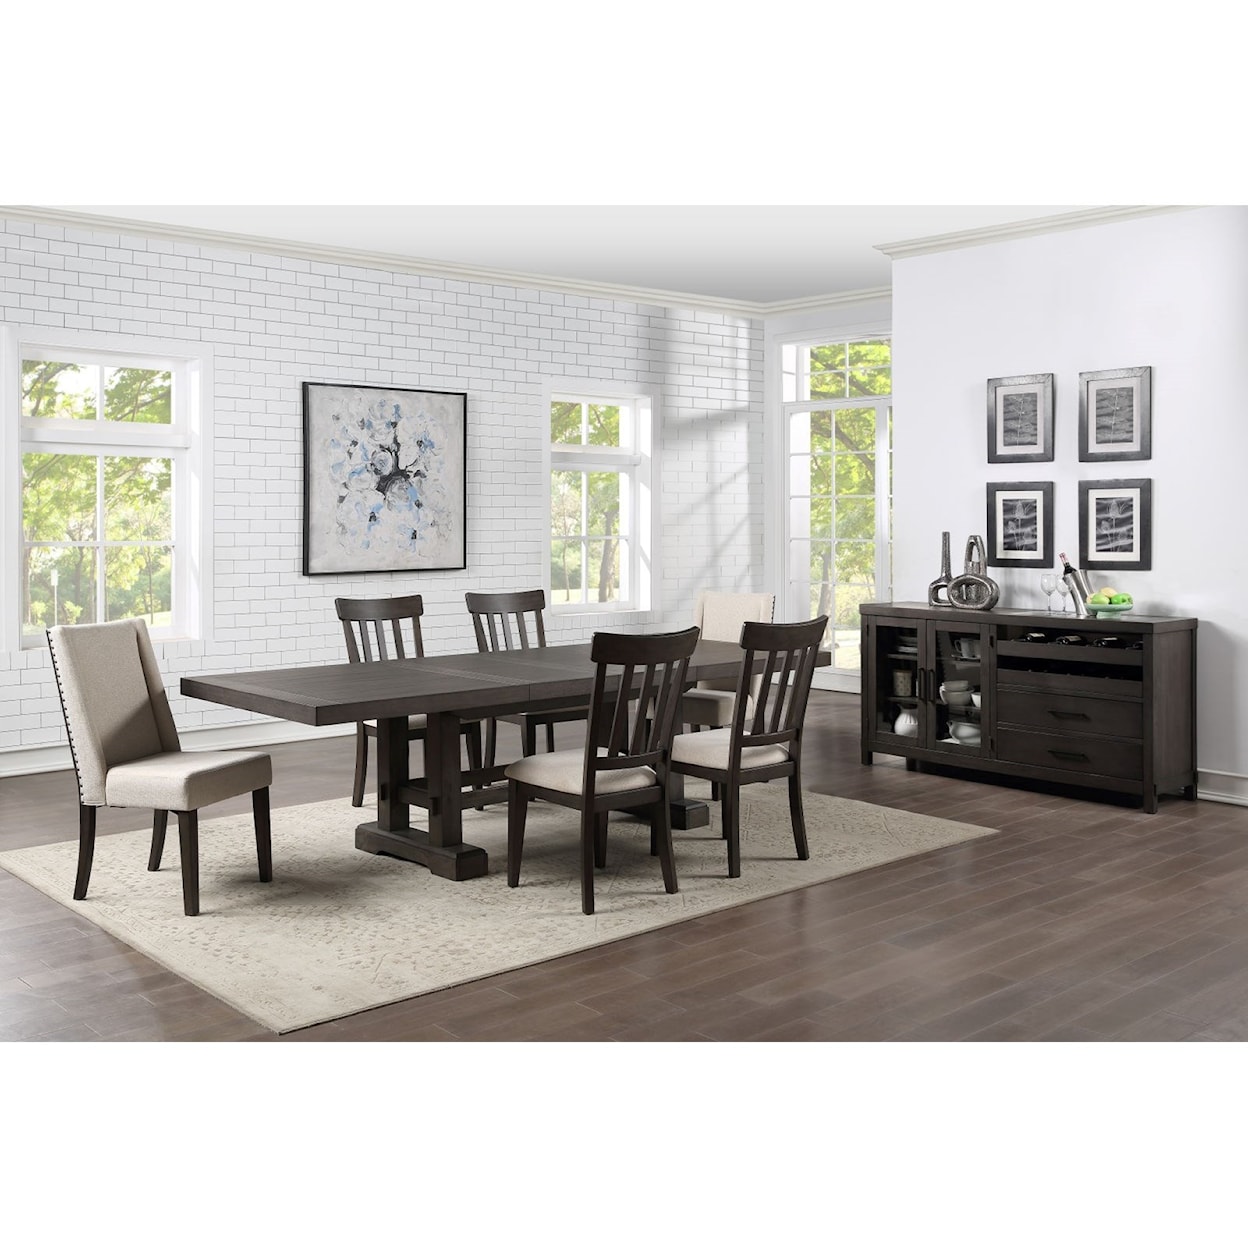 Steve Silver Napa 10 Piece Dining Room Group